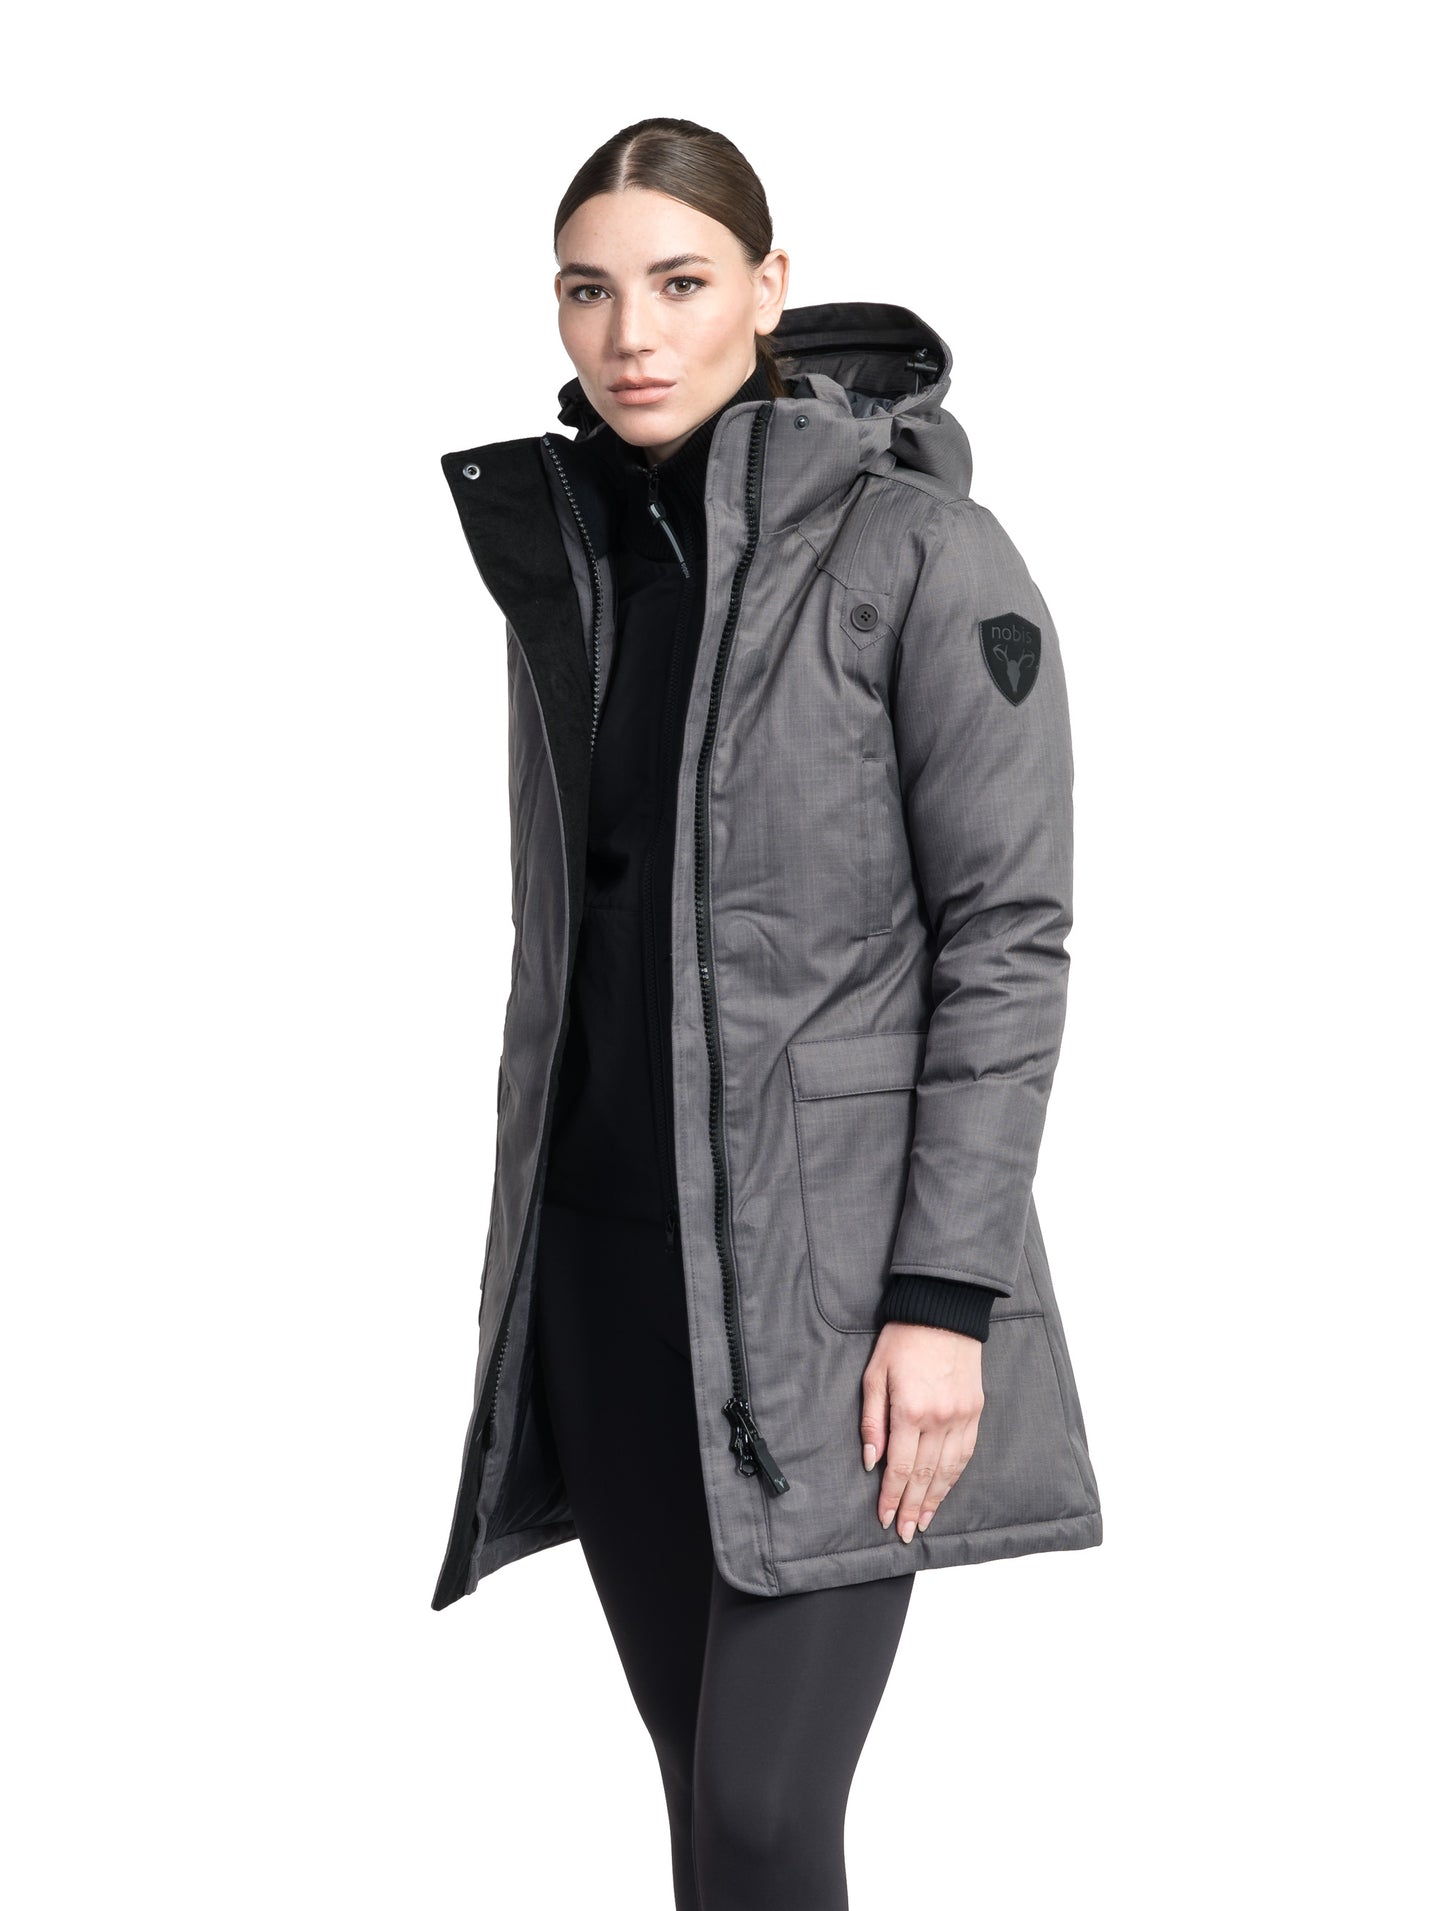 Merideth Furless Ladies Parka in thigh length, Canadian white duck down insulation, removable down-filled hood, centre-front two-way zipper with magnetic wind flap closure, four exterior pockets, and elastic ribbed cuffs, in Steel Grey